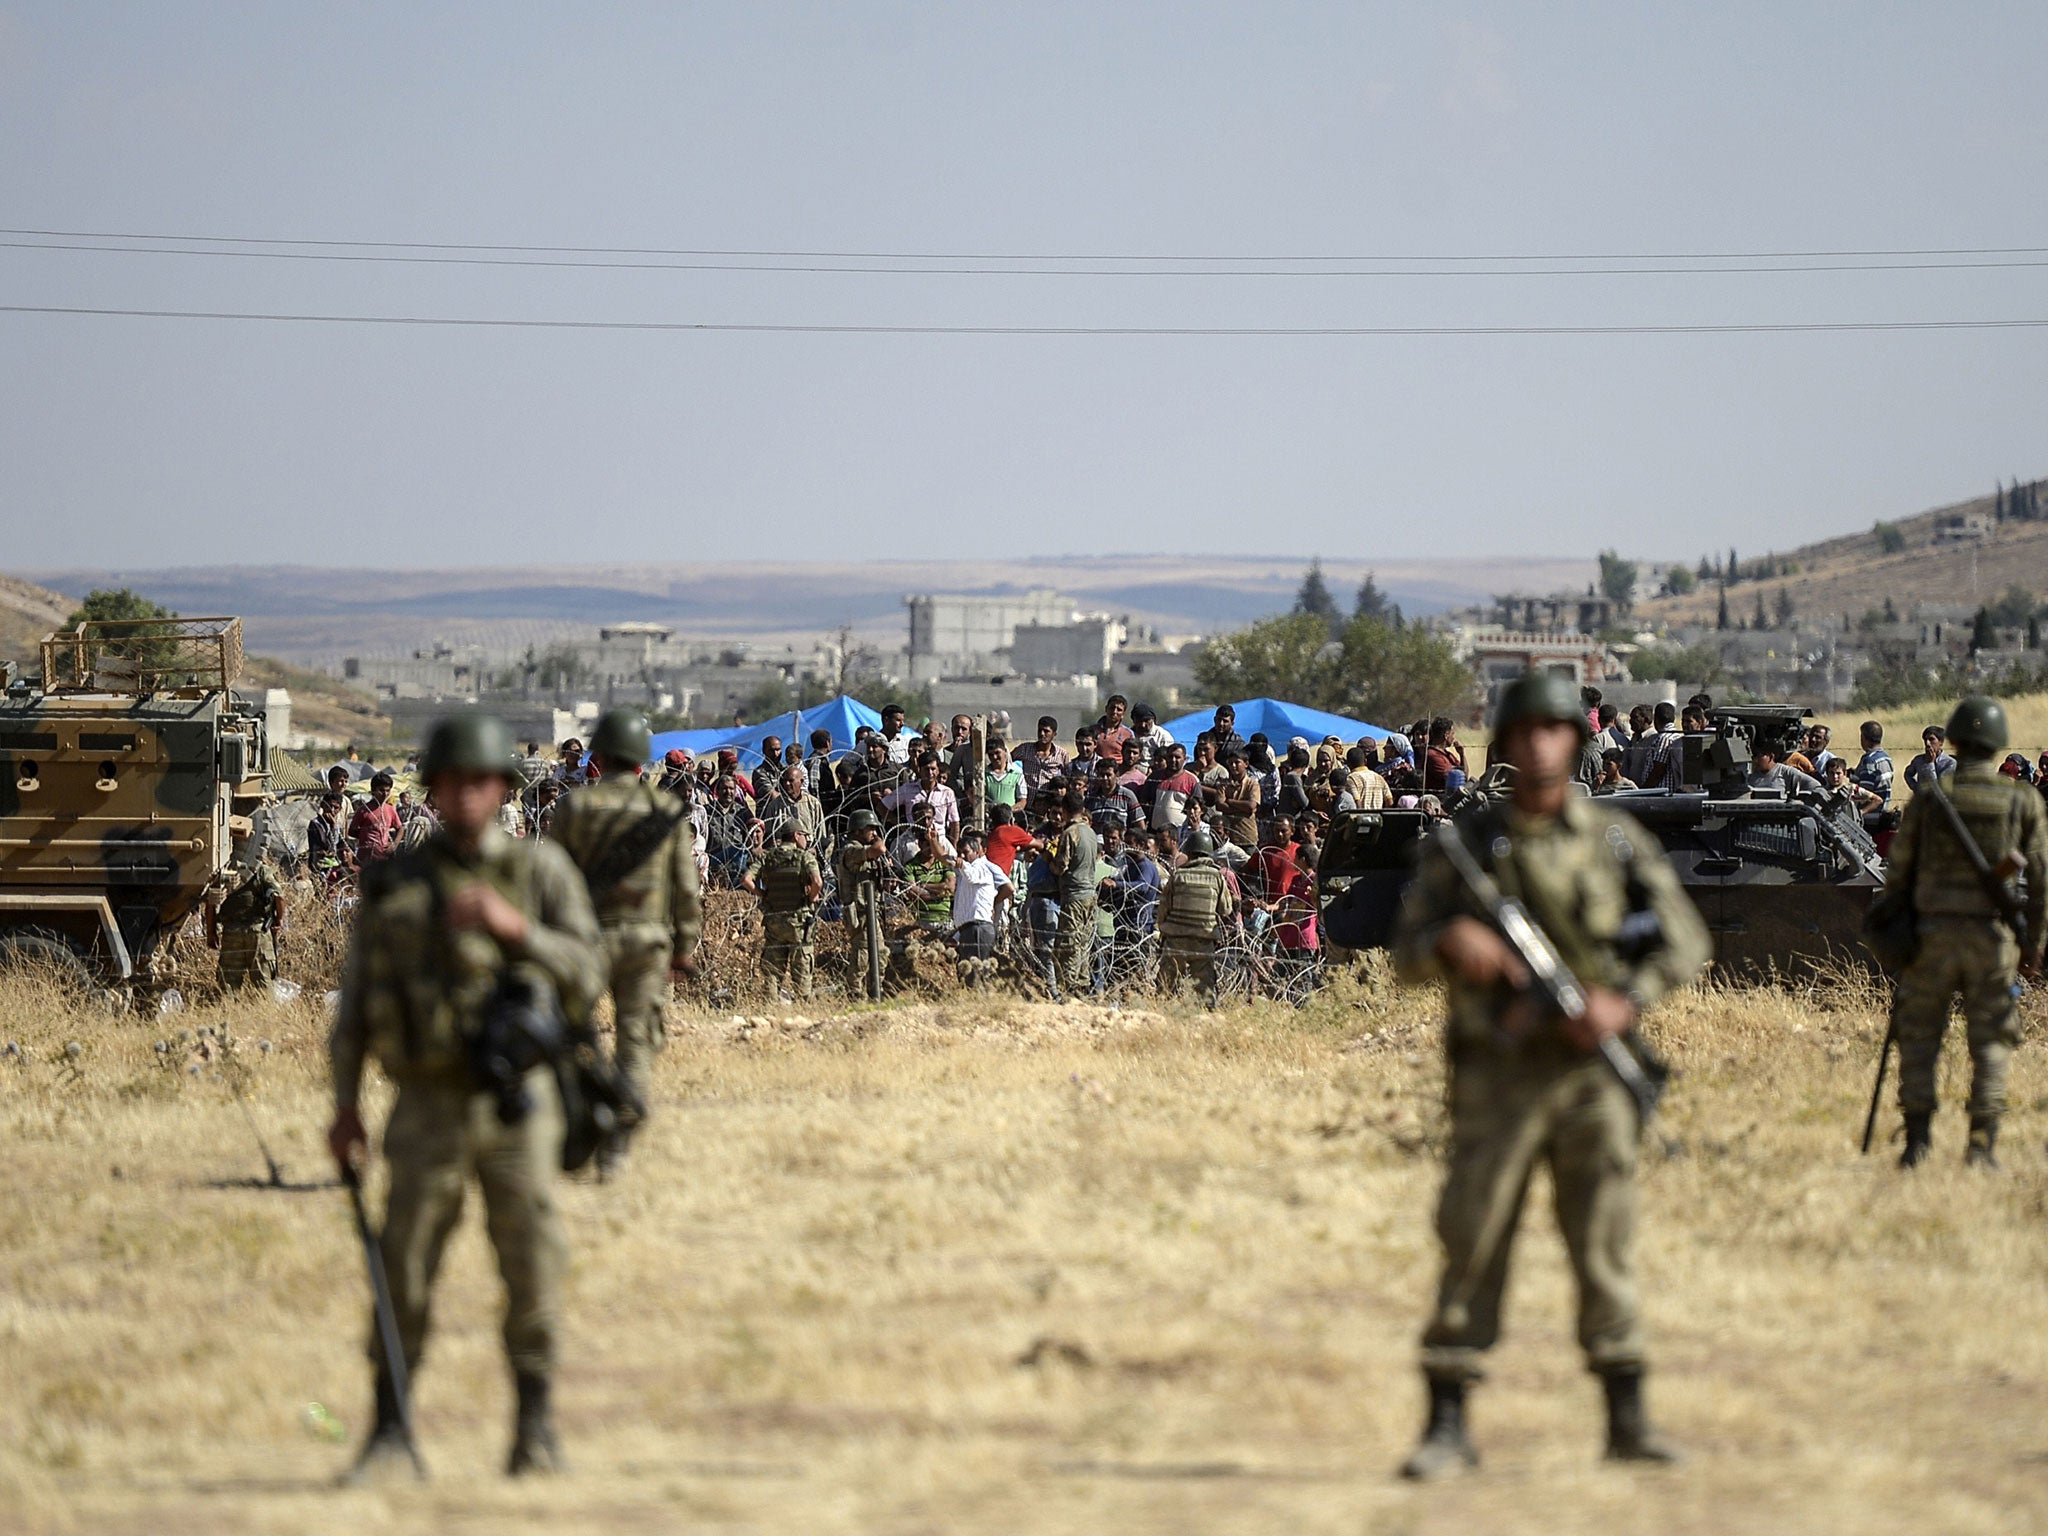 Turkish soldiers stand guard as Kurdish people wait for their relatives who wait near fences on the Syrian border on June 26, 2015 in Suruc, Turkey